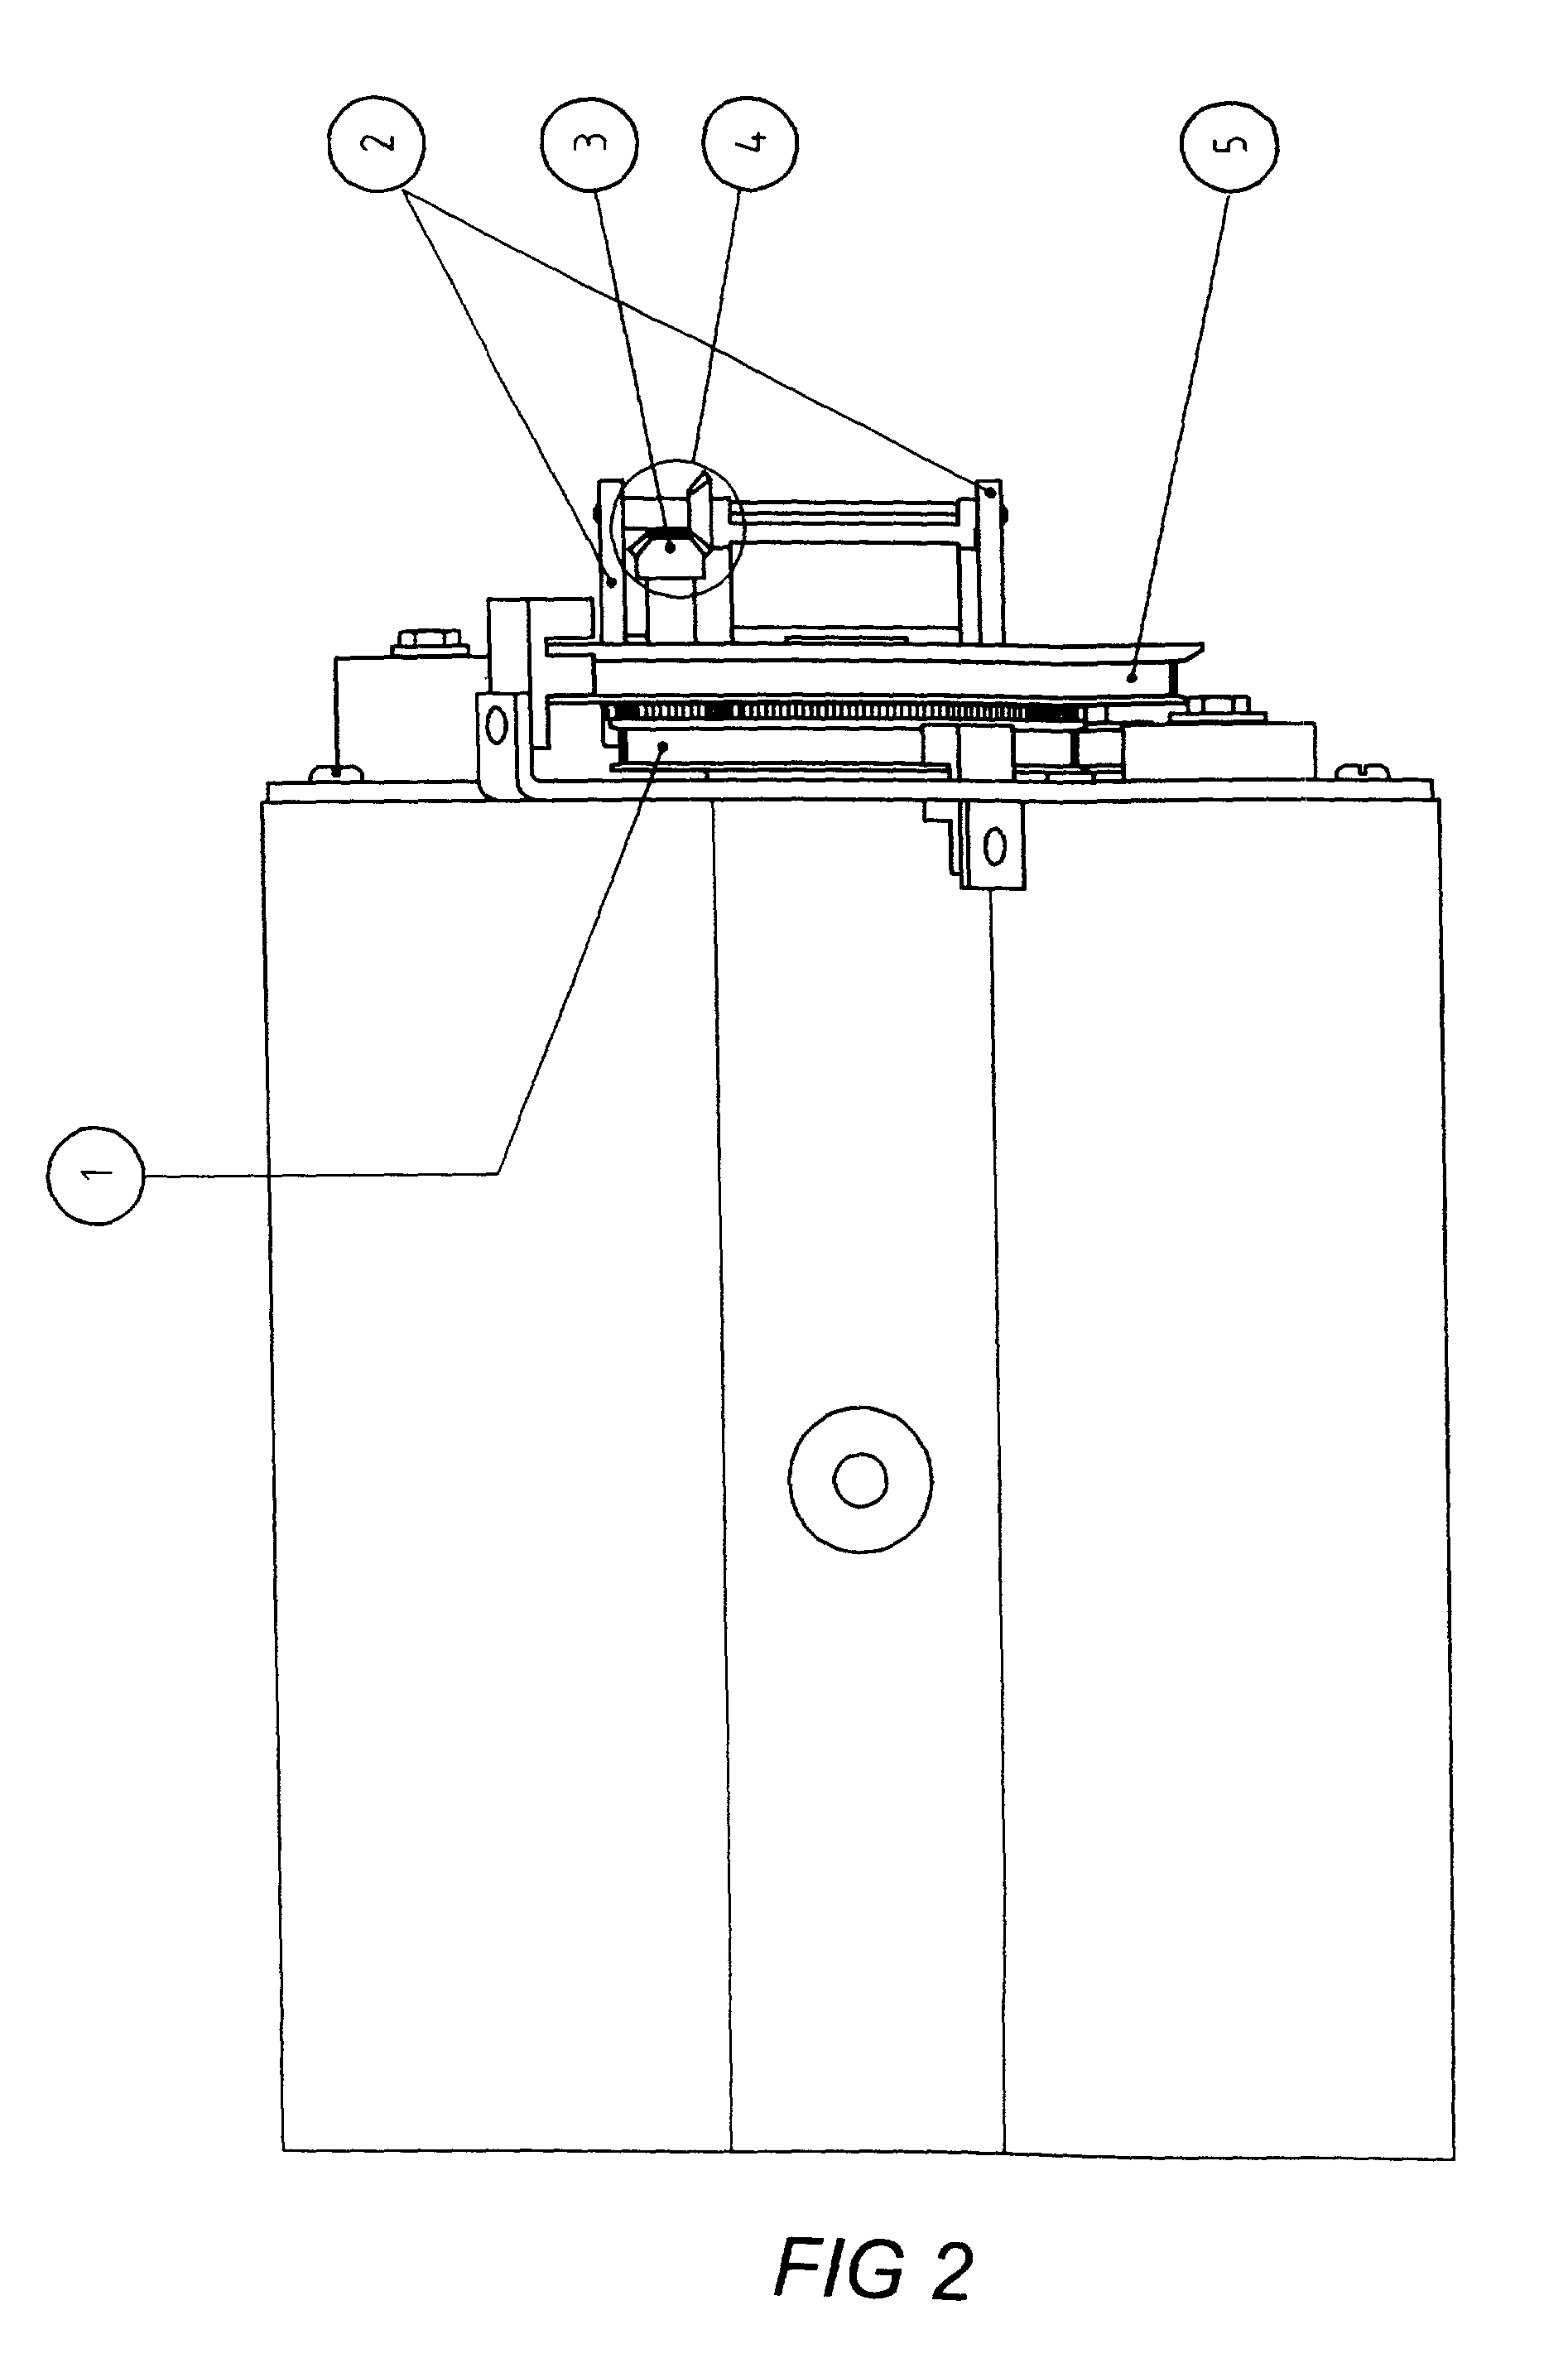 Digital camera having panning and/or tilting functionality, and an image rotating device for such a camera